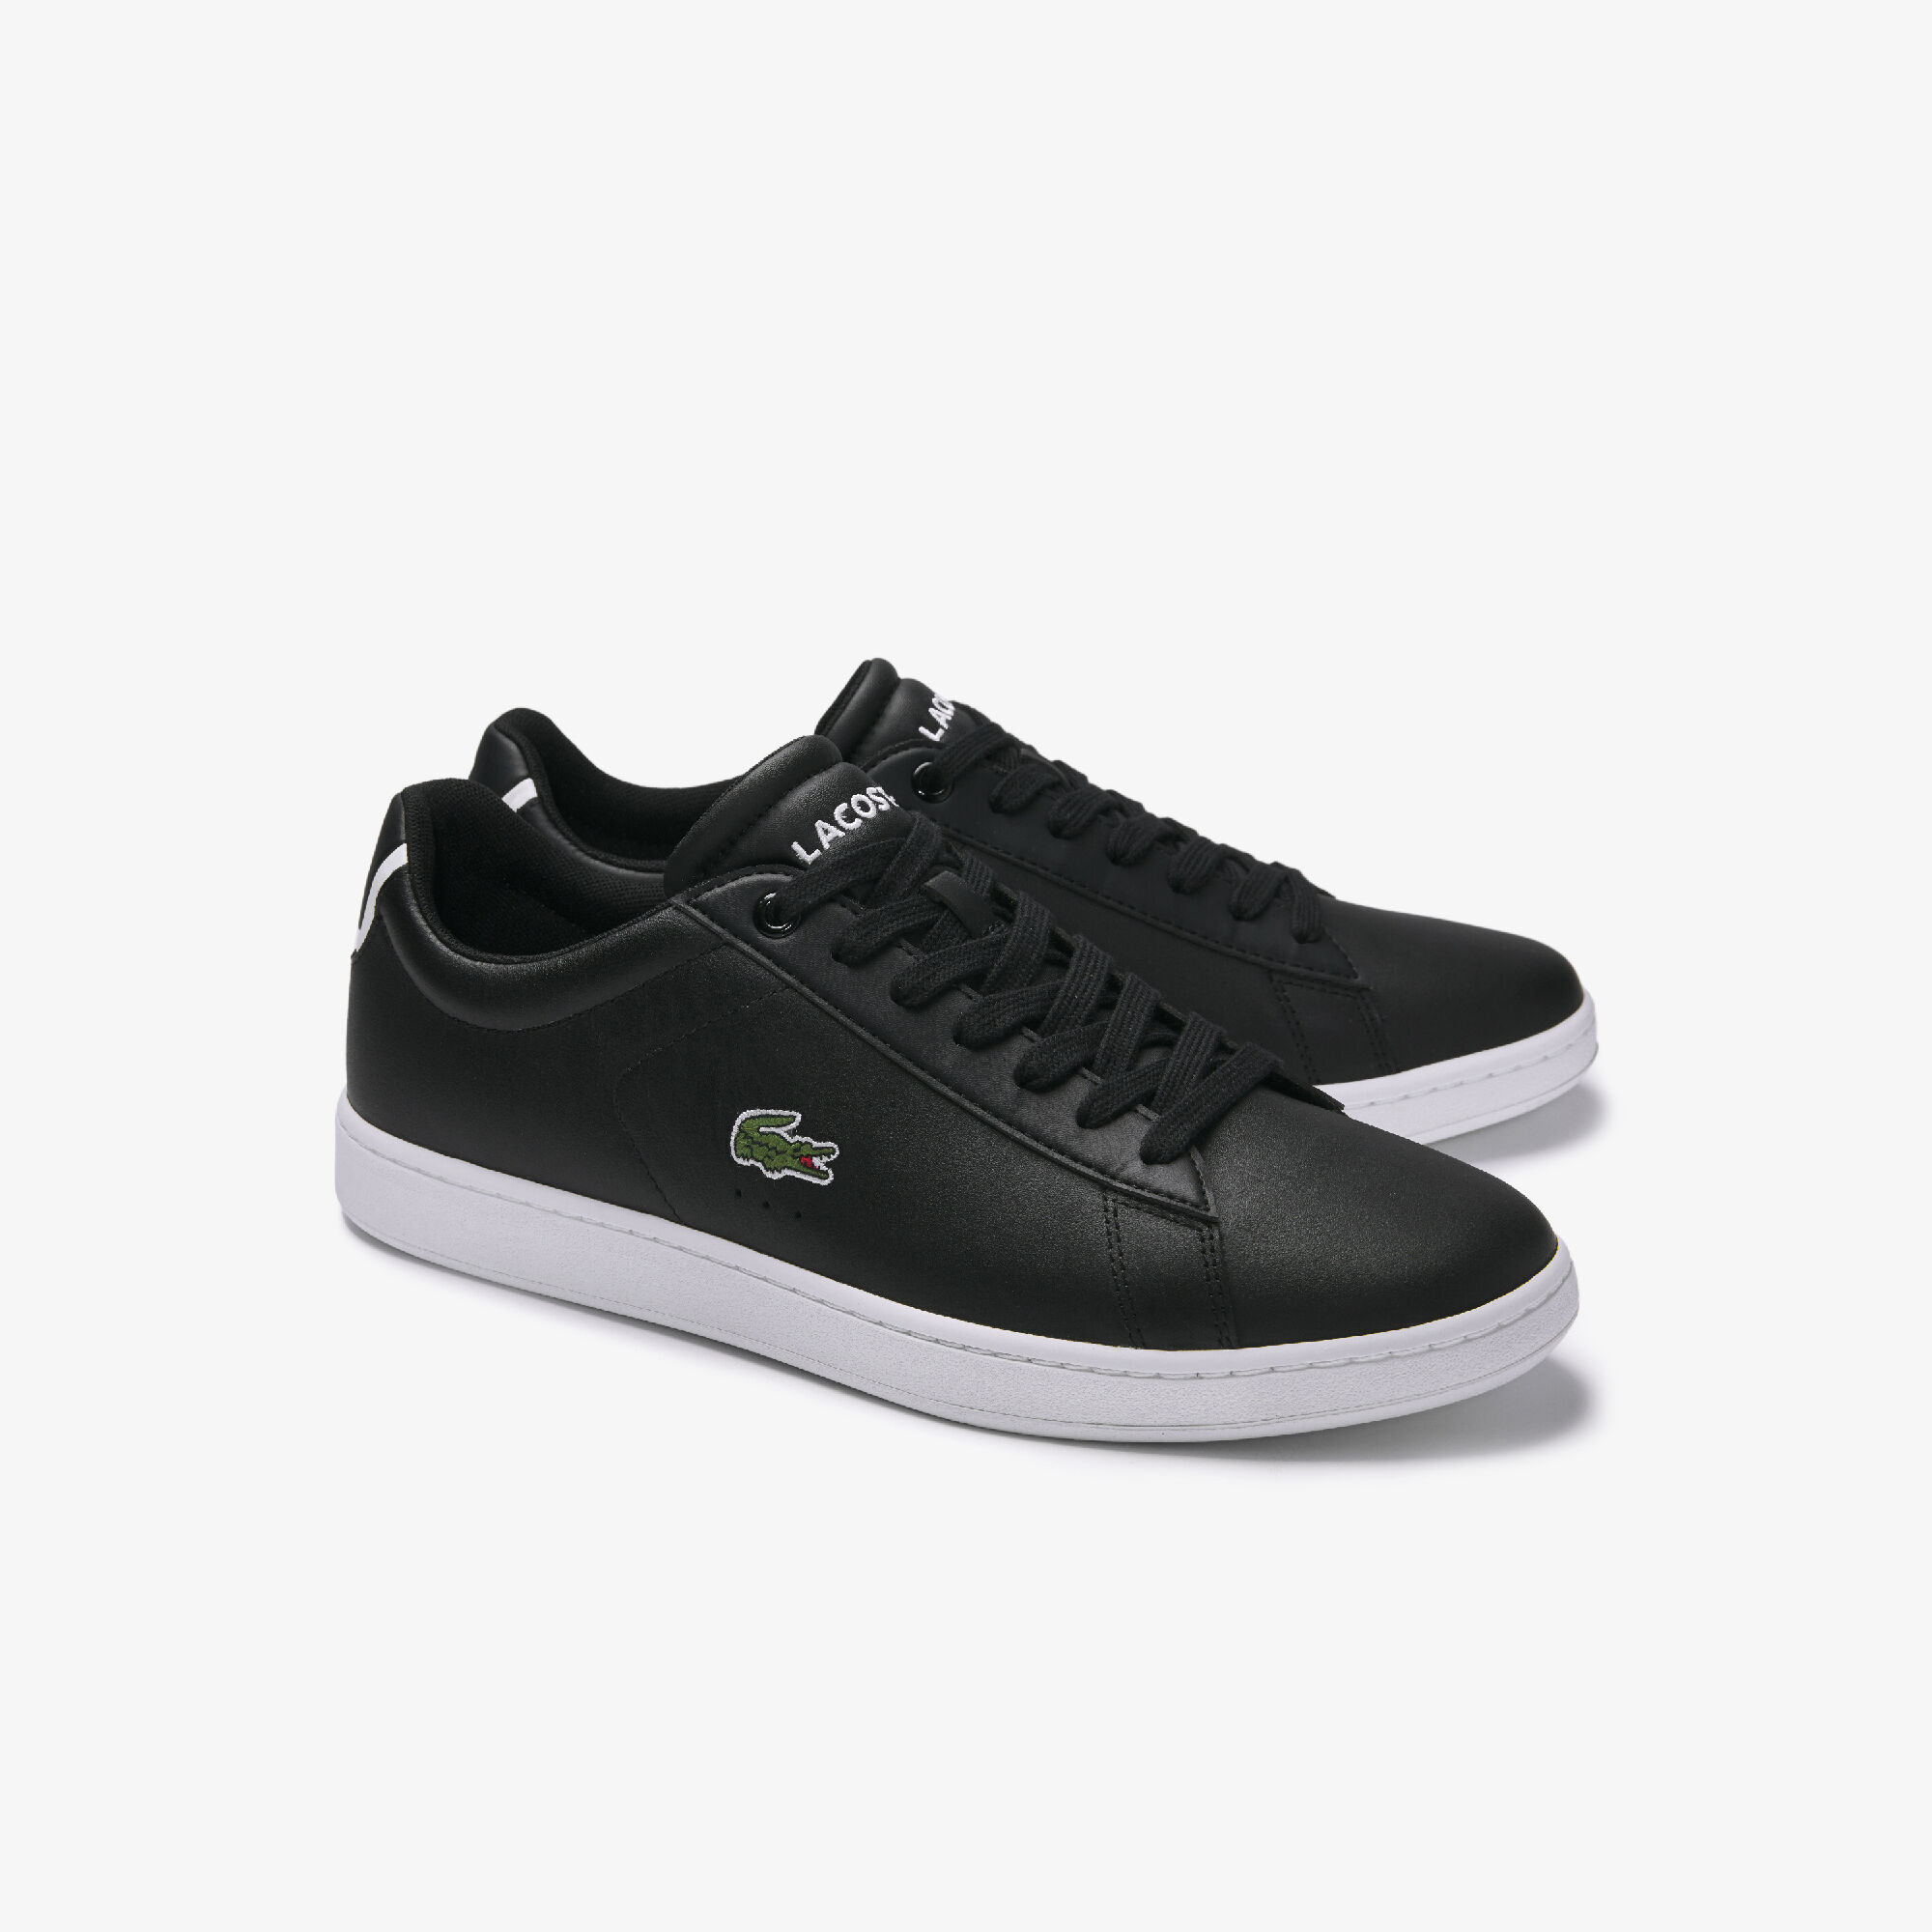 Men's Carnaby Evo Leather Trainers